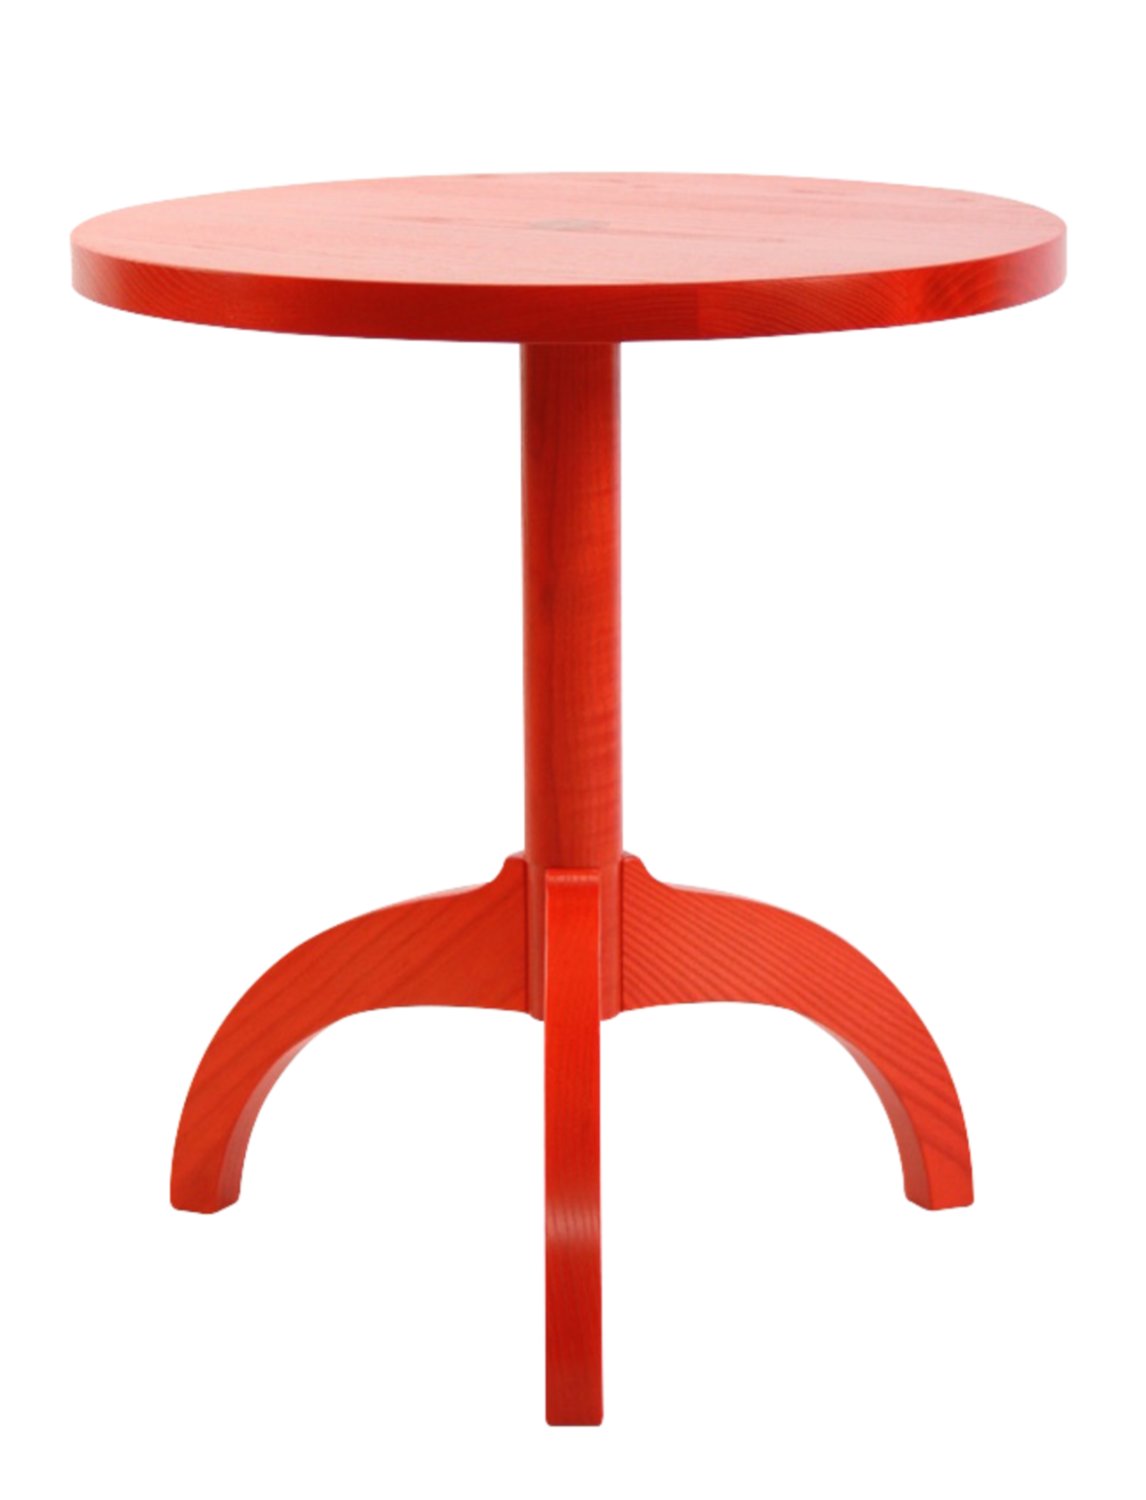 Tripod side table from O&G Studio